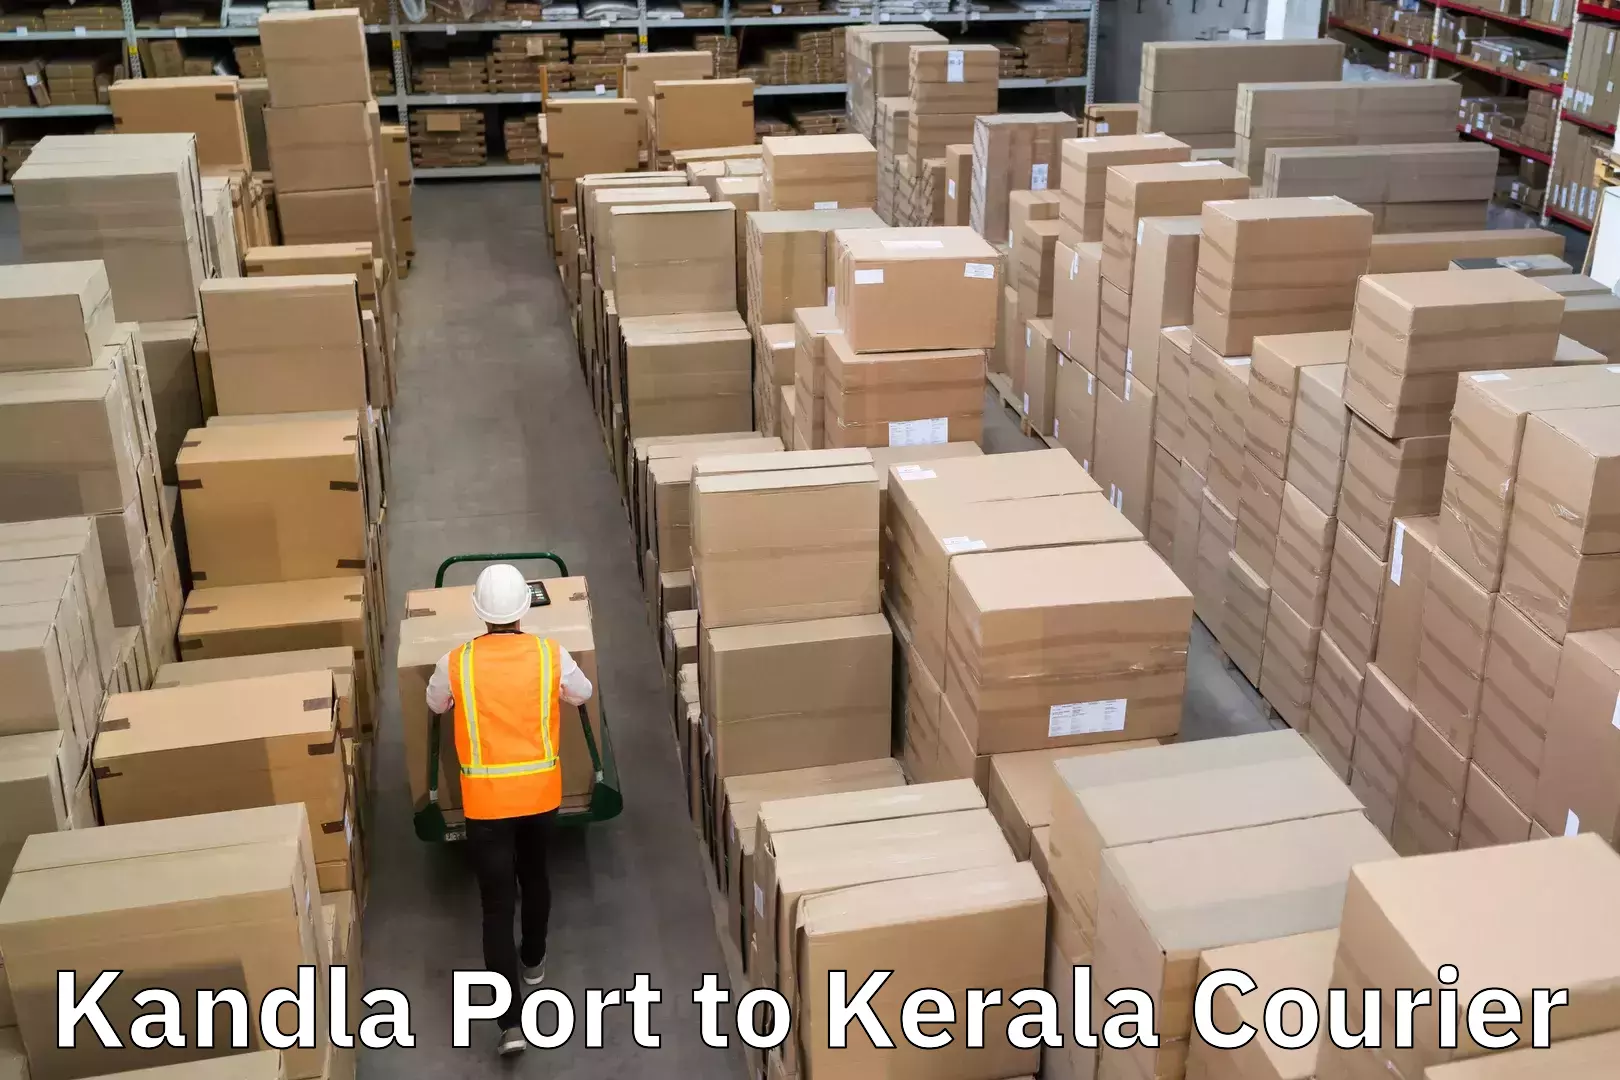 Advanced tracking systems in Kandla Port to Kerala